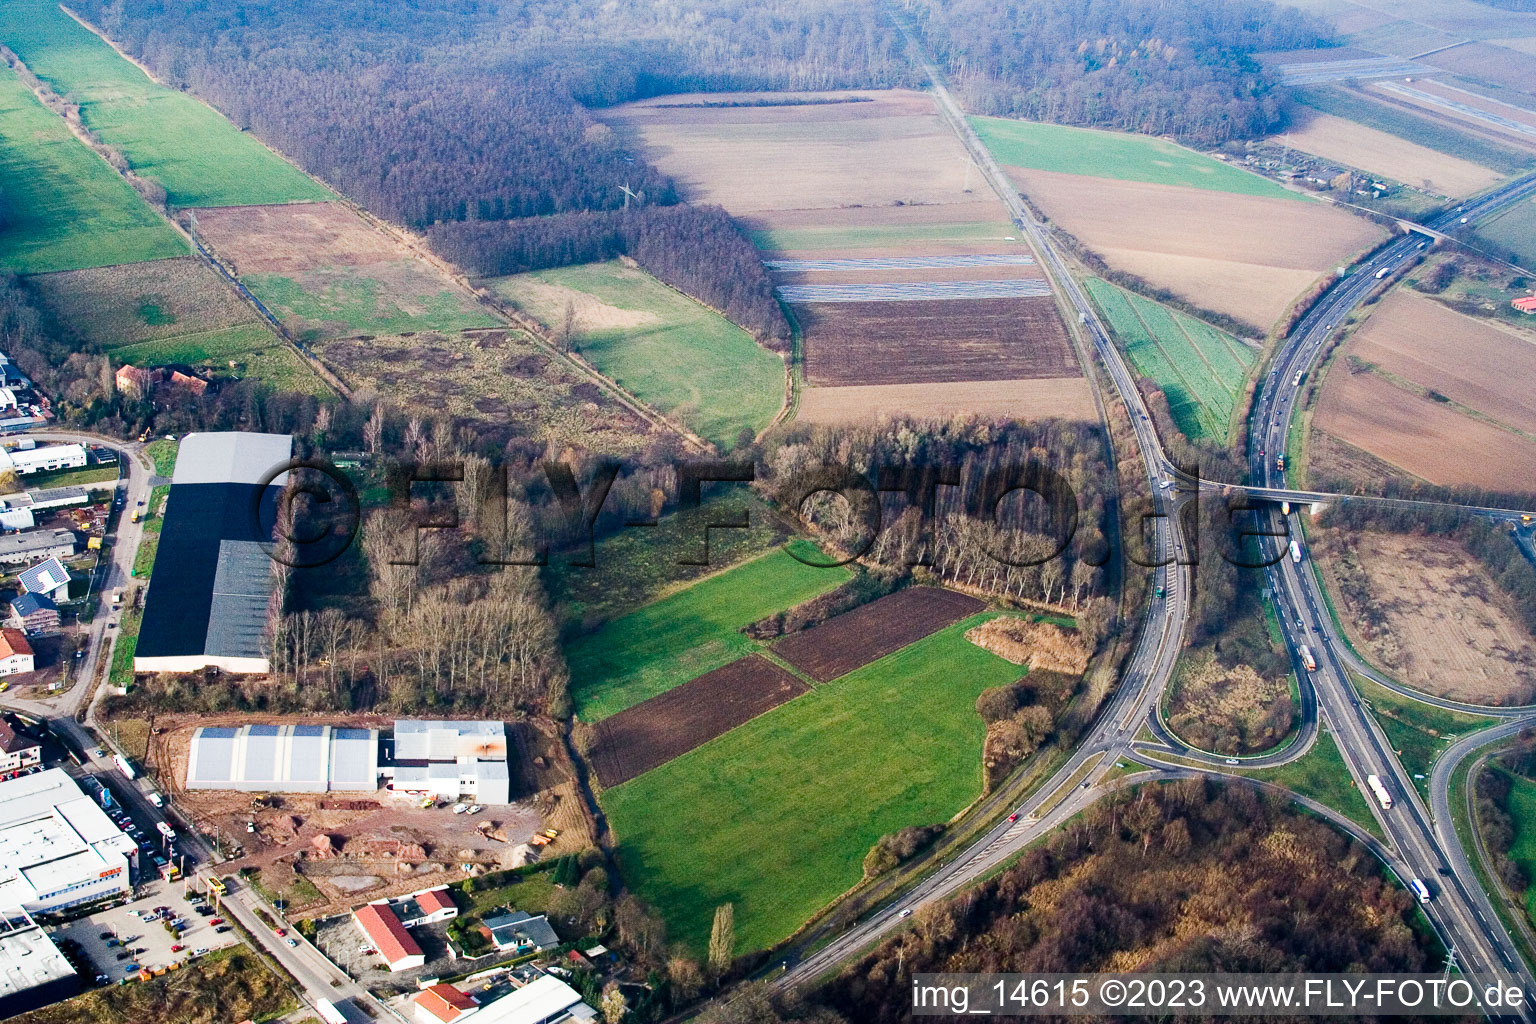 Am Horst industrial area in the district Minderslachen in Kandel in the state Rhineland-Palatinate, Germany seen from above